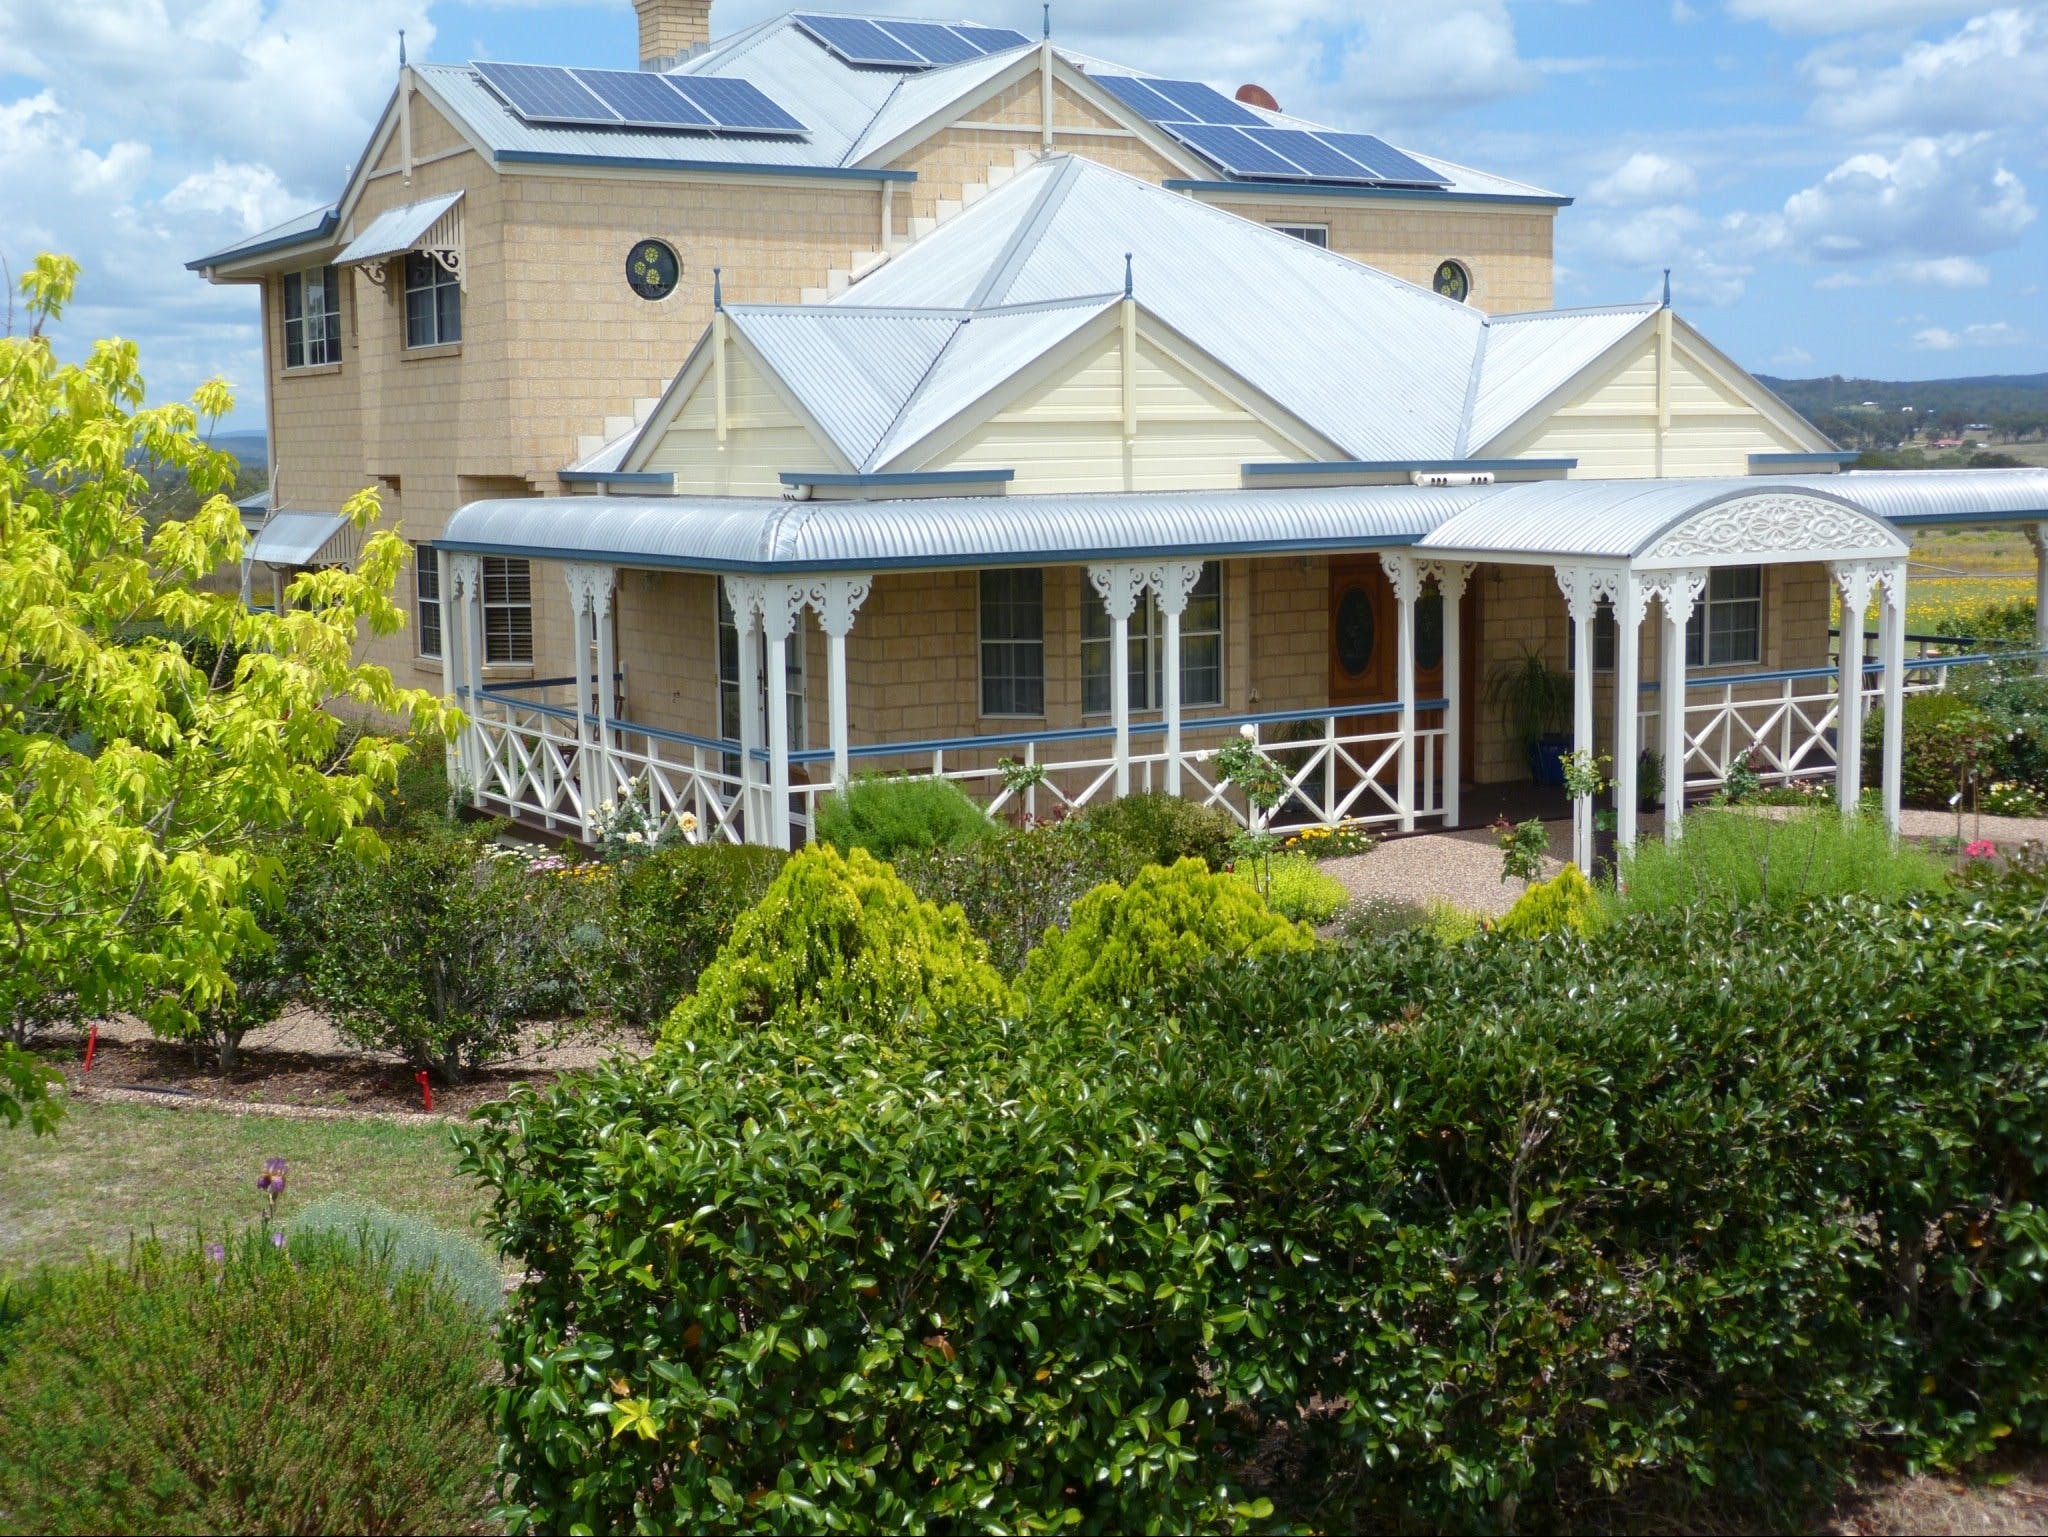 Grovely House Bed and Breakfast - tourismnoosa.com